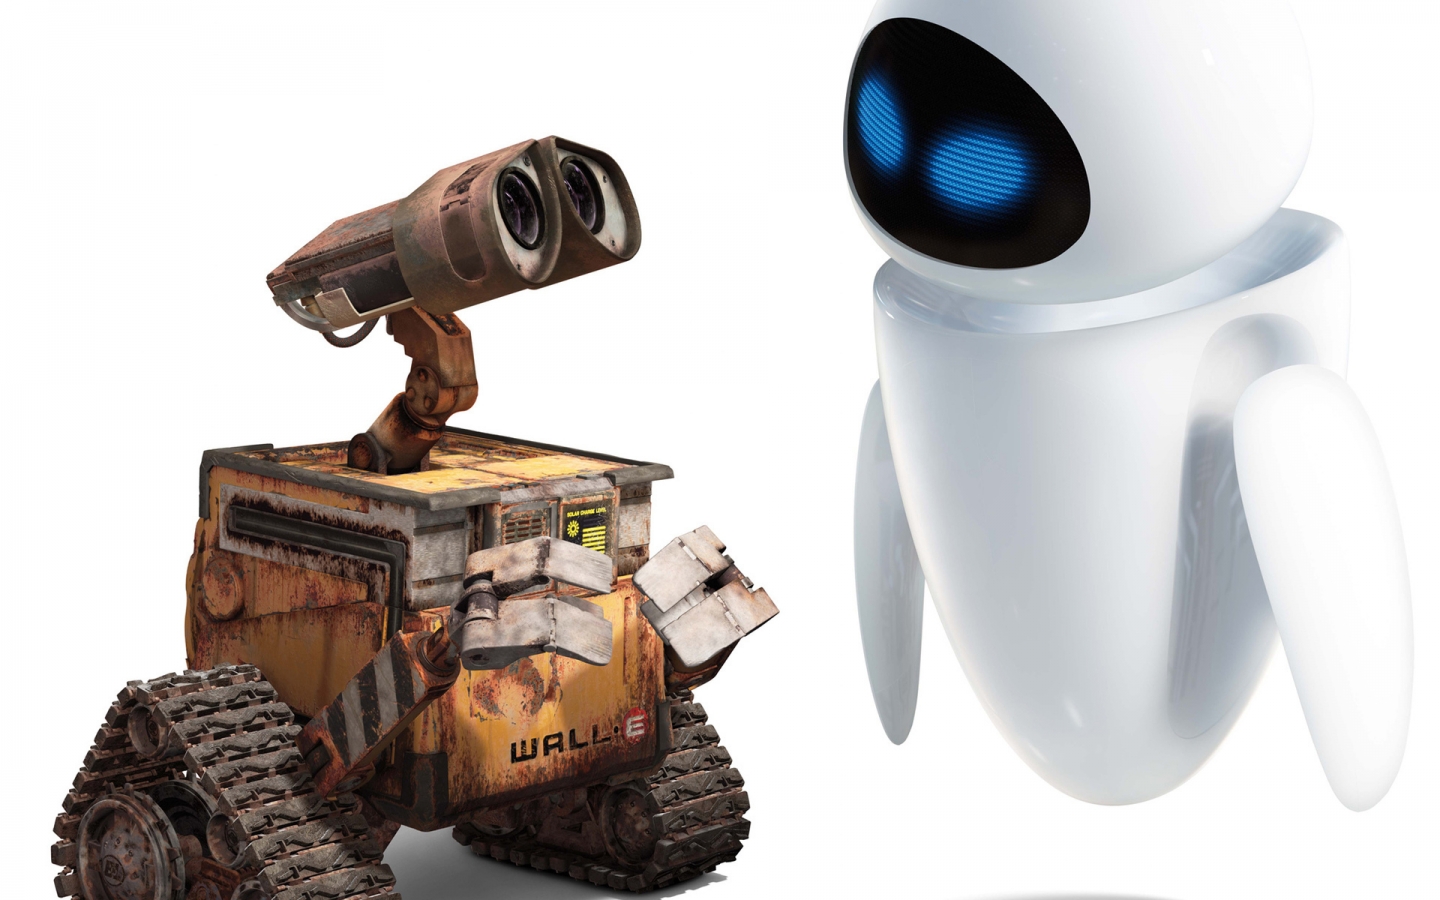 Walle Robots for 1440 x 900 widescreen resolution